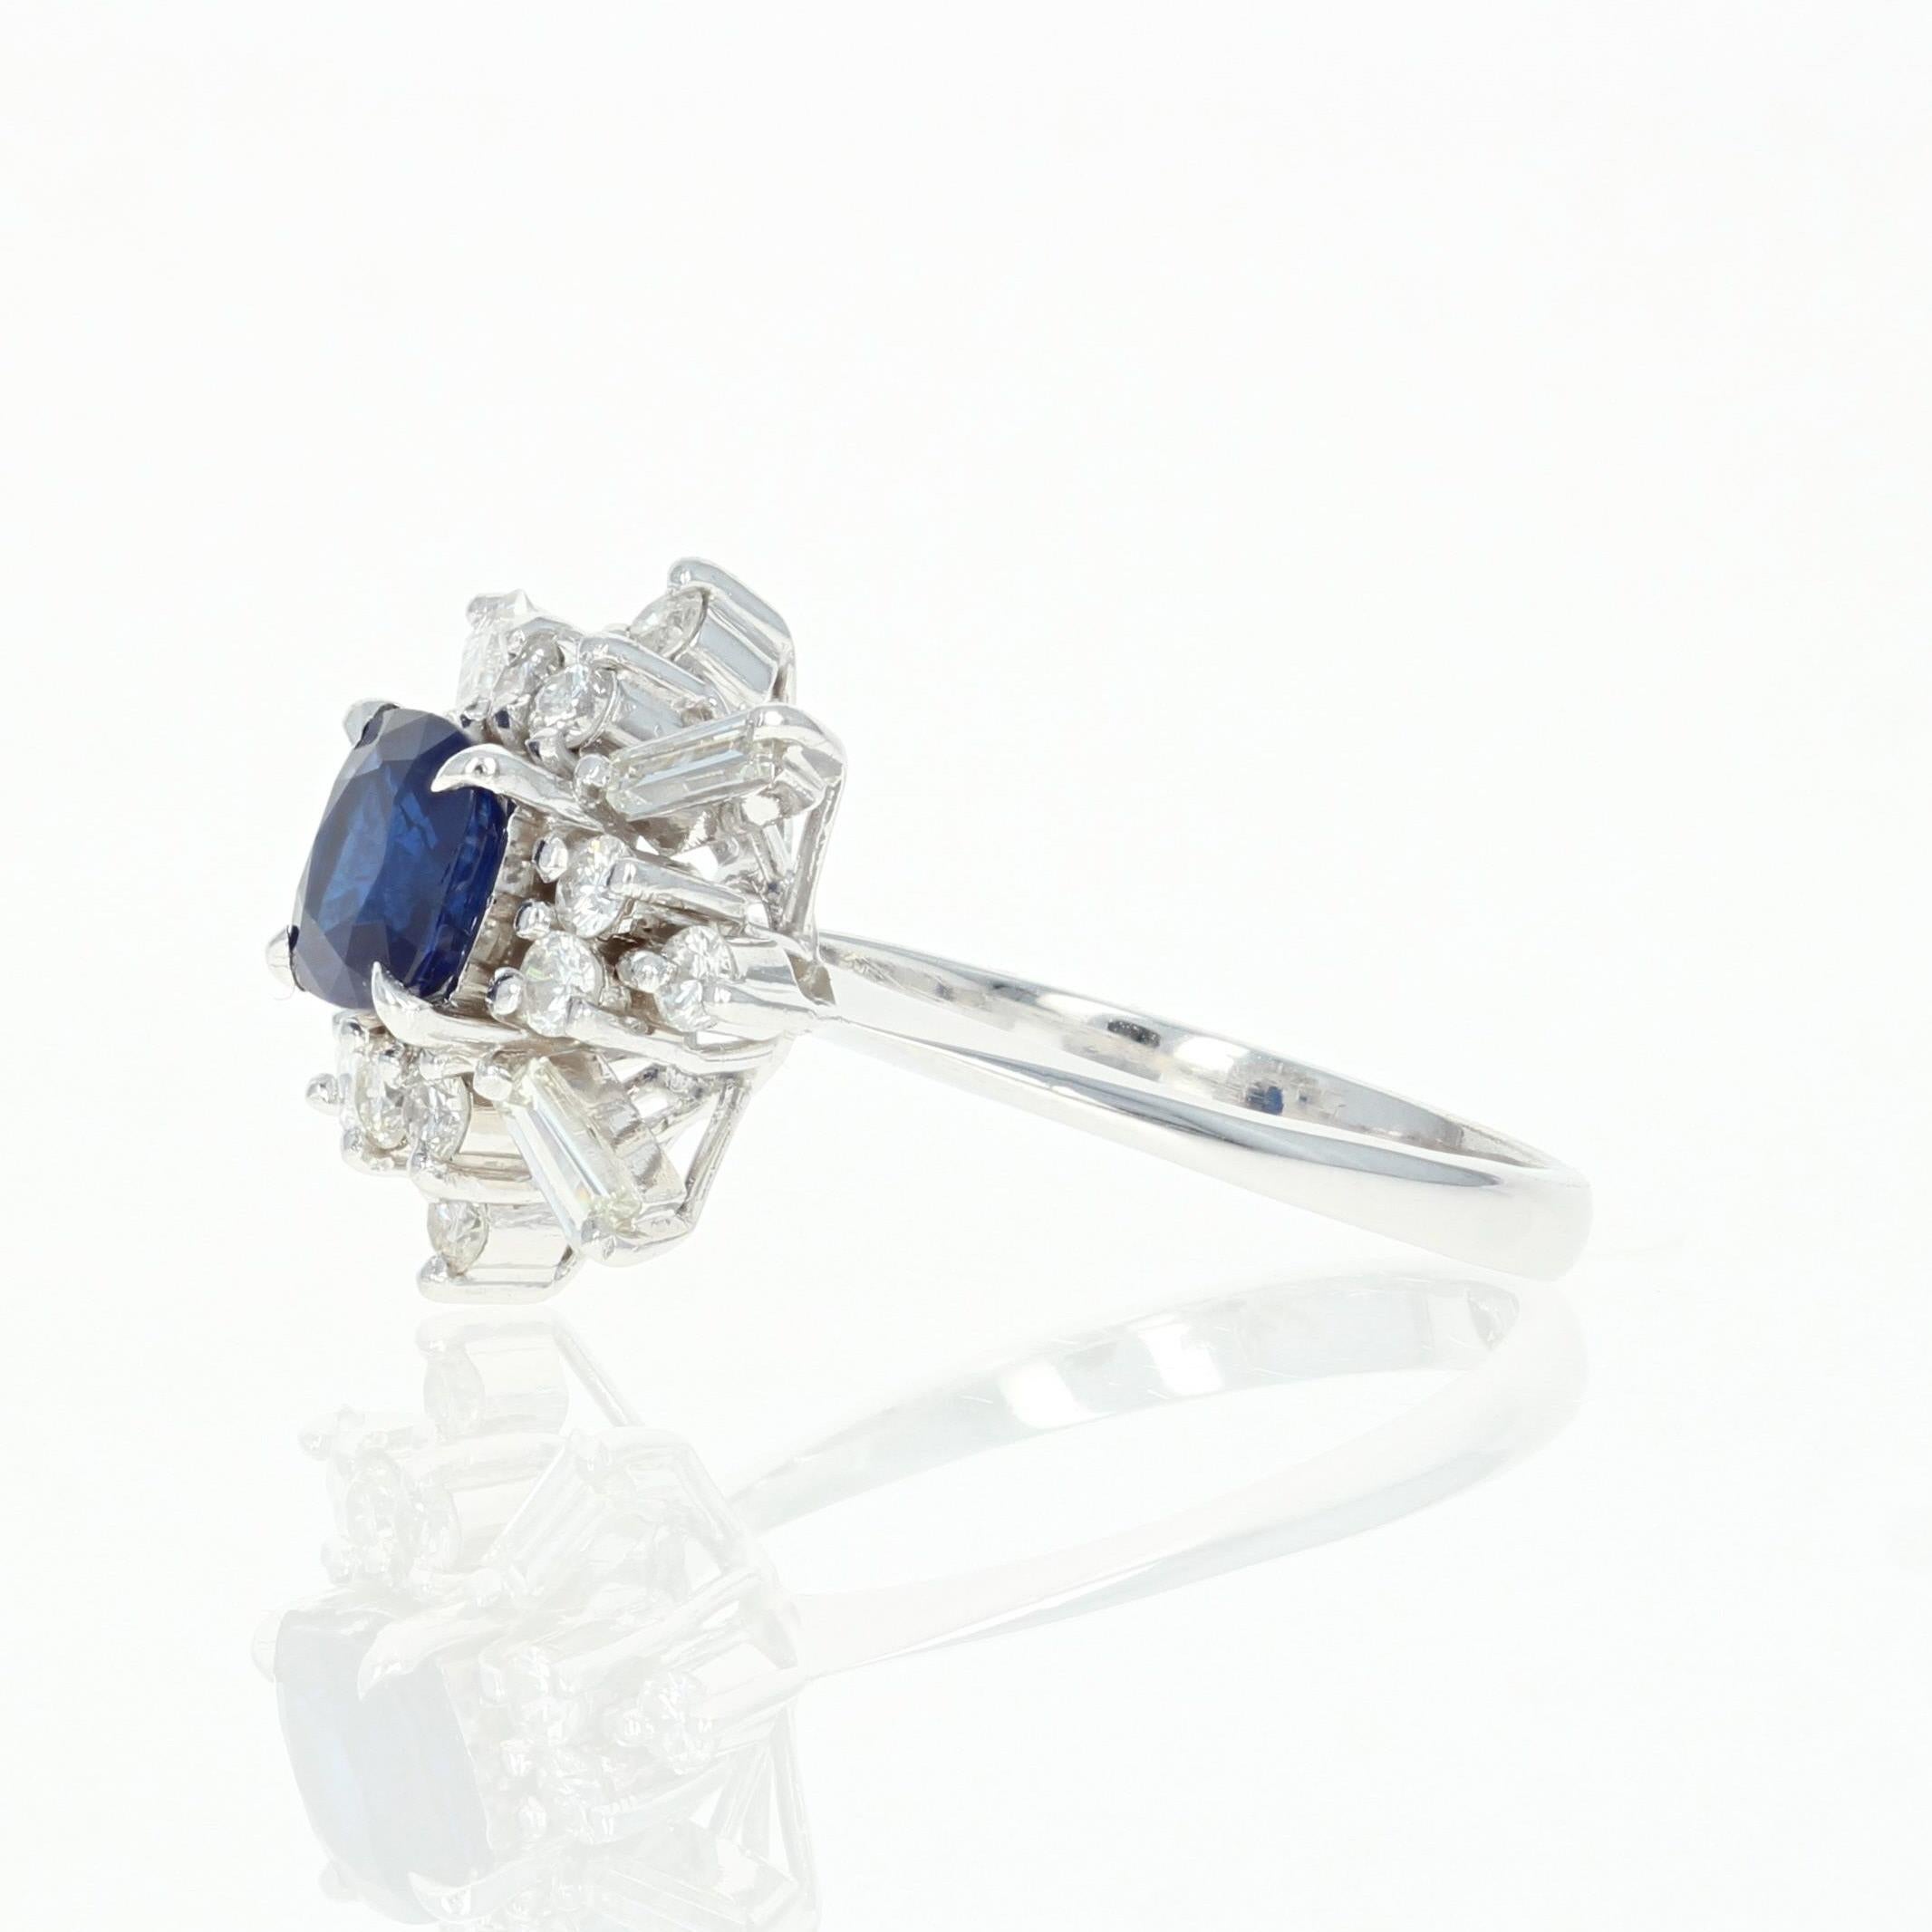 Majestic and brilliant, this ring is destined to become a cherished addition to your collection of fine jewelry! This piece showcases a high quality, top color blue sapphire solitaire that is framed by a striking array of sparkling white diamonds